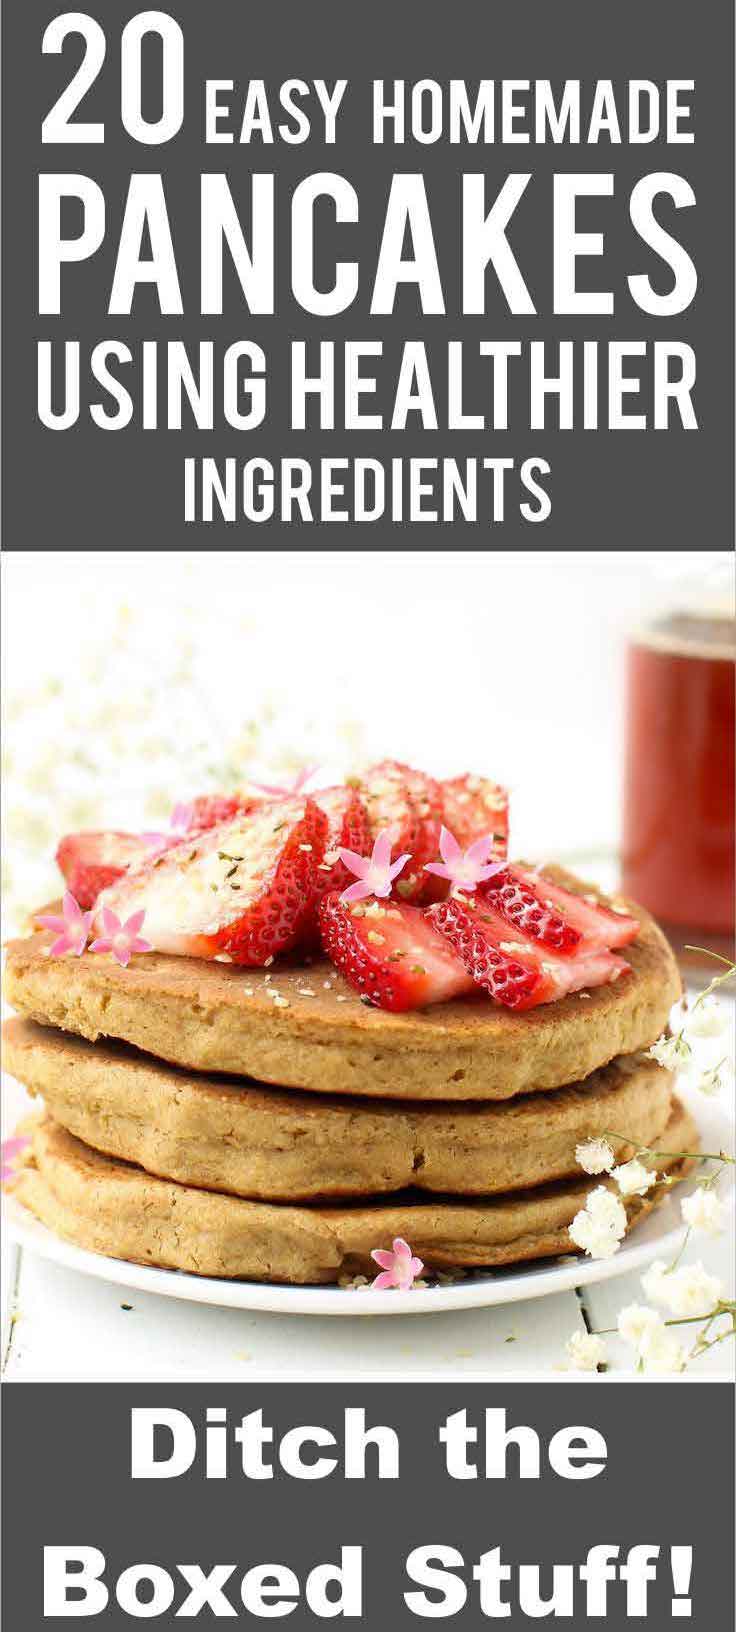 I know buying boxed pancake mix is super tempting but hear me out: homemade pancakes are way better. Check out these easy recipes.